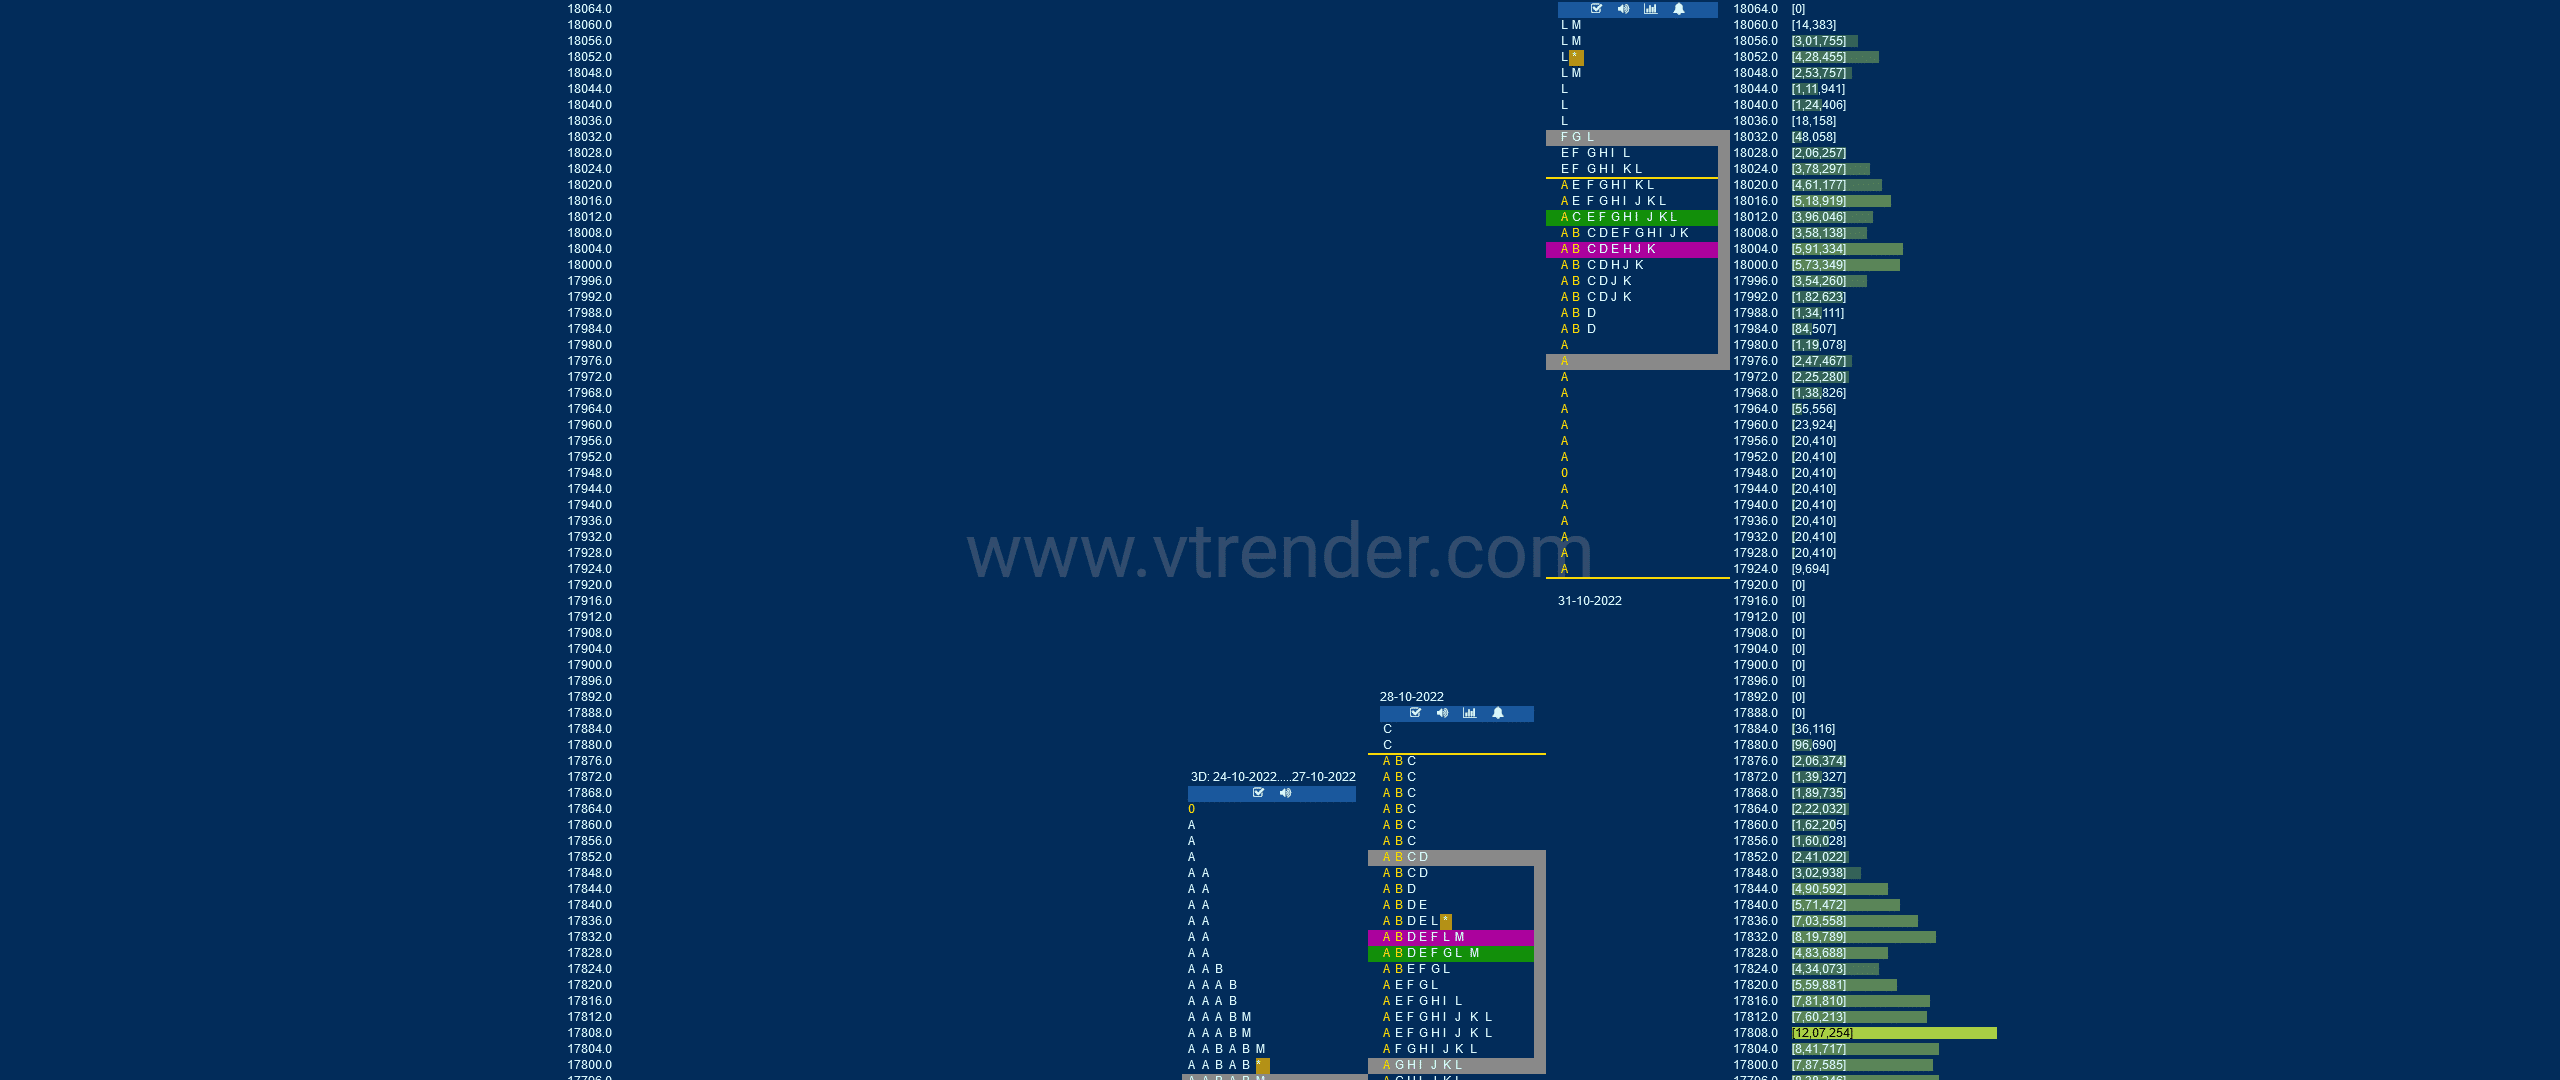 Nf Market Profile Analysis Dated 31St Oct 2022 Banknifty Futures, Charts, Day Trading, Intraday Trading, Intraday Trading Strategies, Market Profile, Market Profile Trading Strategies, Nifty Futures, Order Flow Analysis, Support And Resistance, Technical Analysis, Trading Strategies, Volume Profile Trading